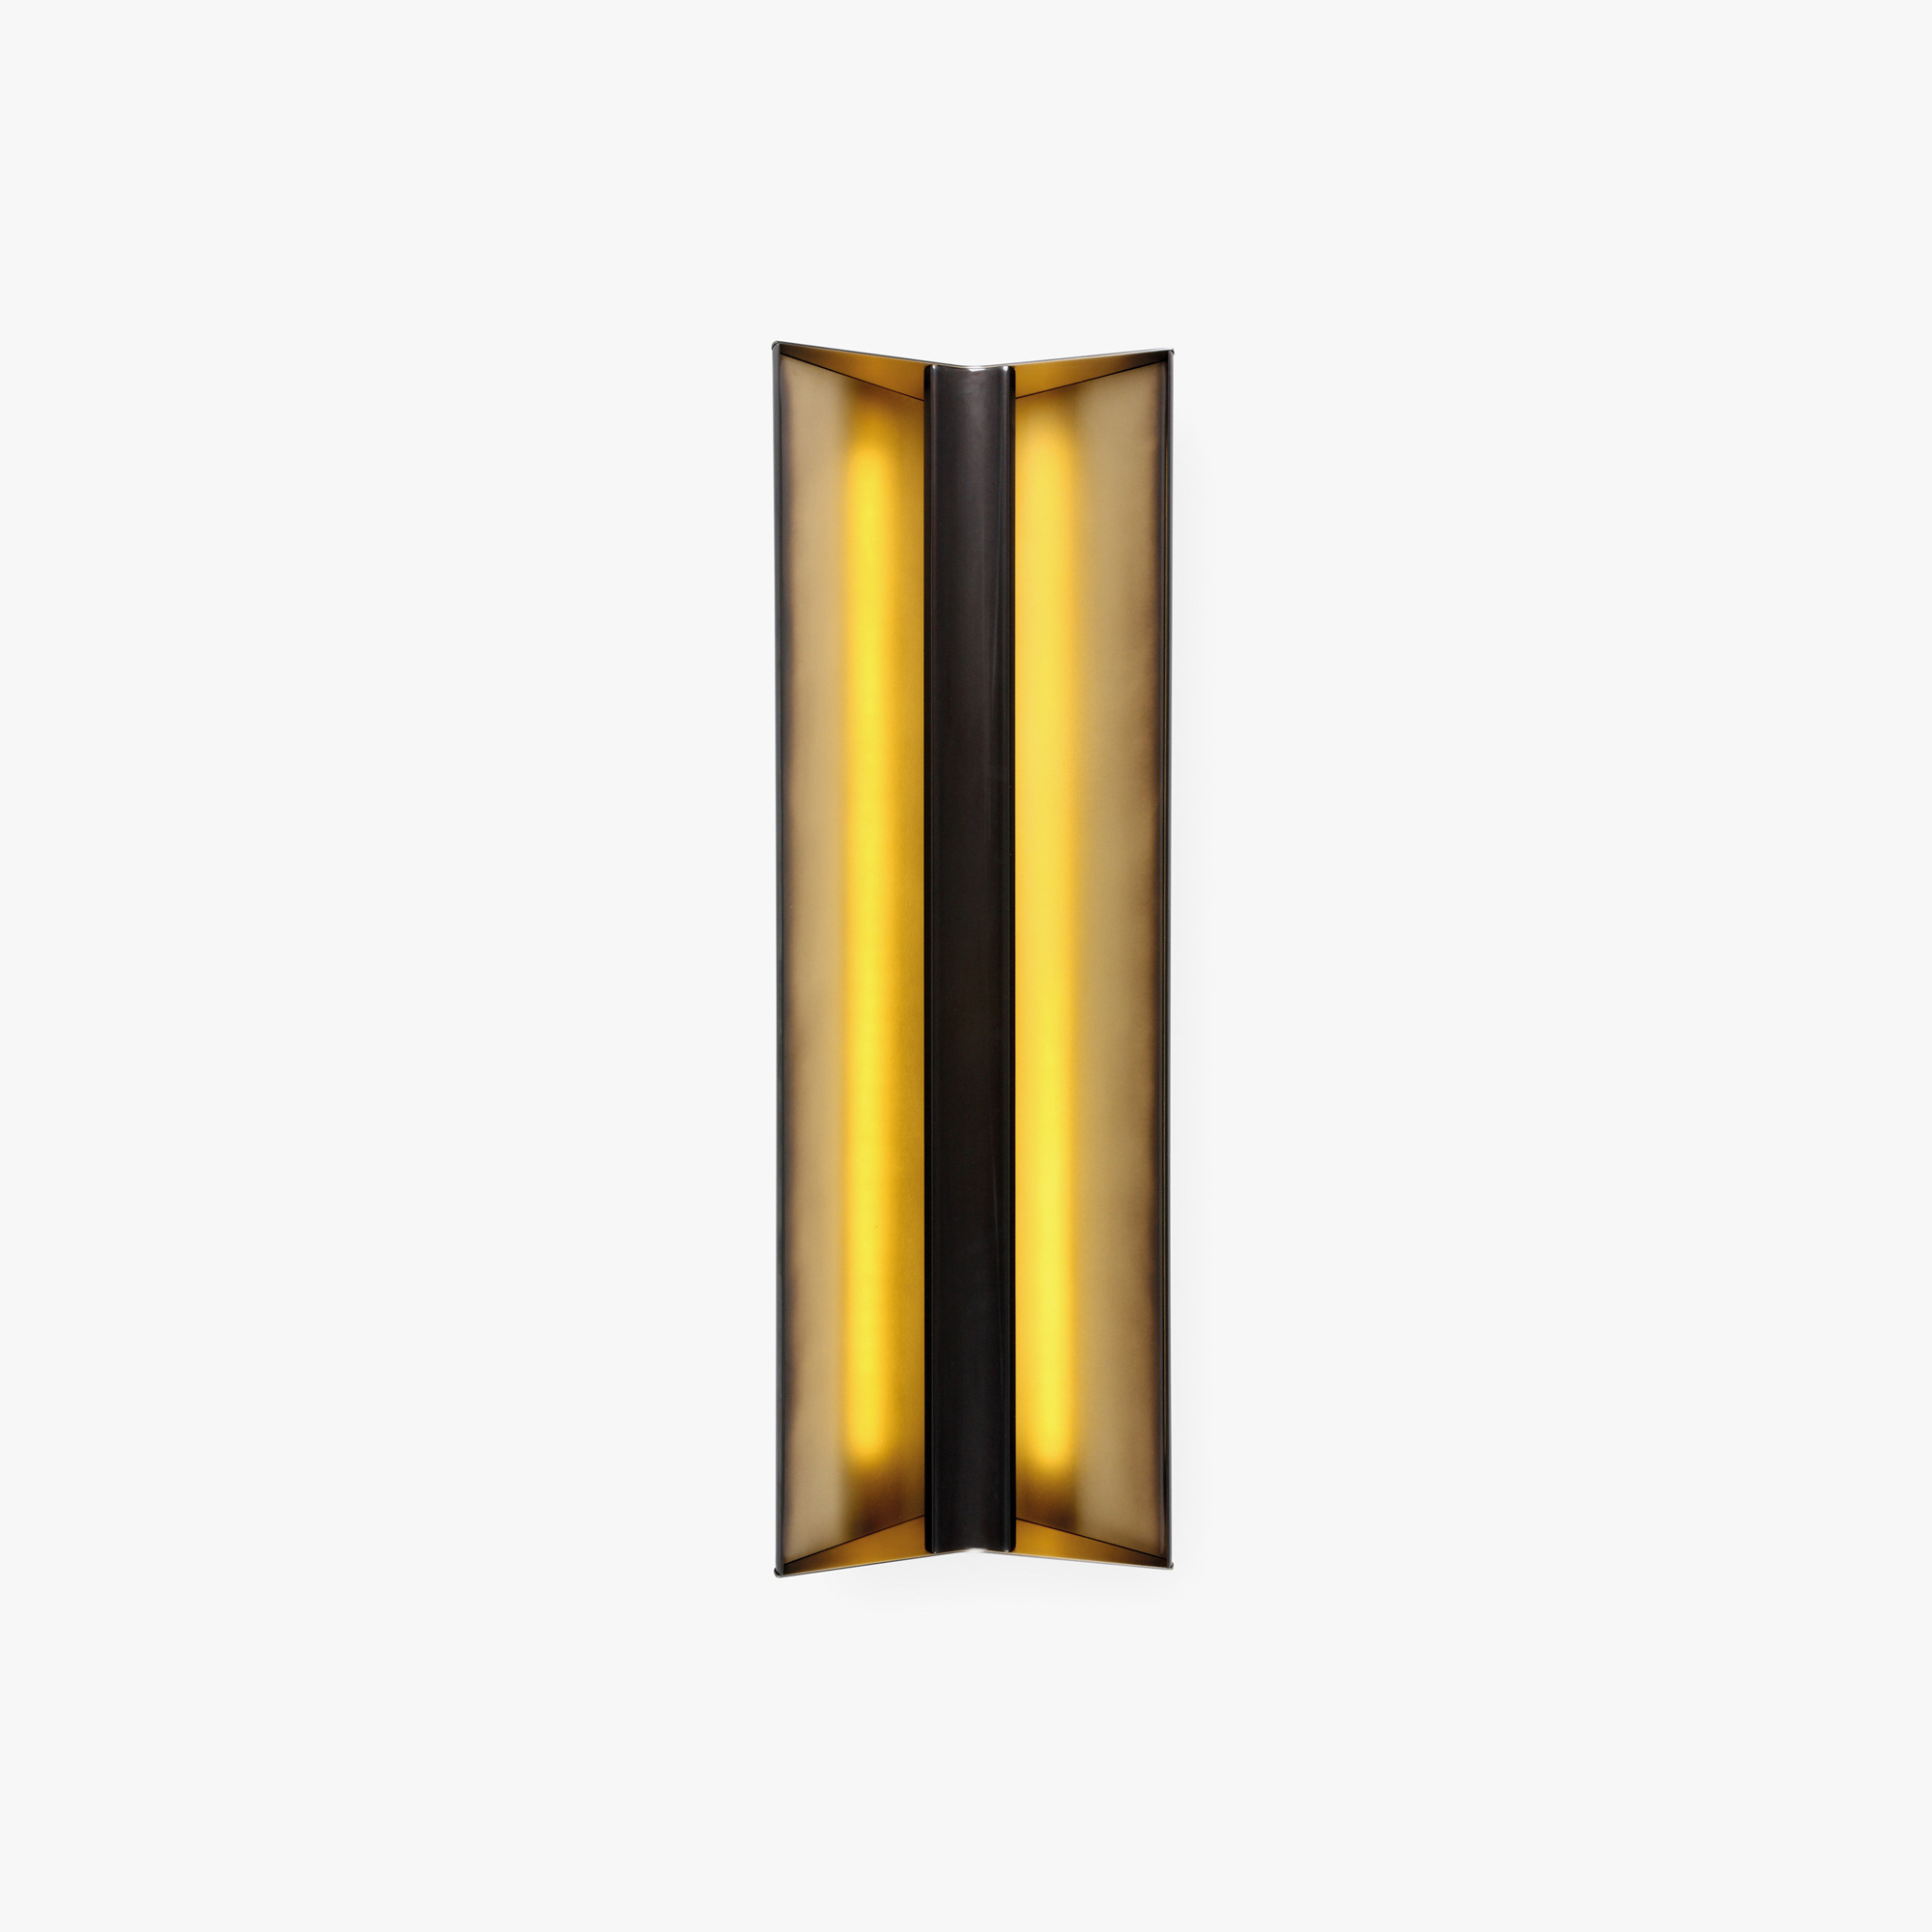 ANGUS WALL LIGHT by Ferronnier | South Hill Home